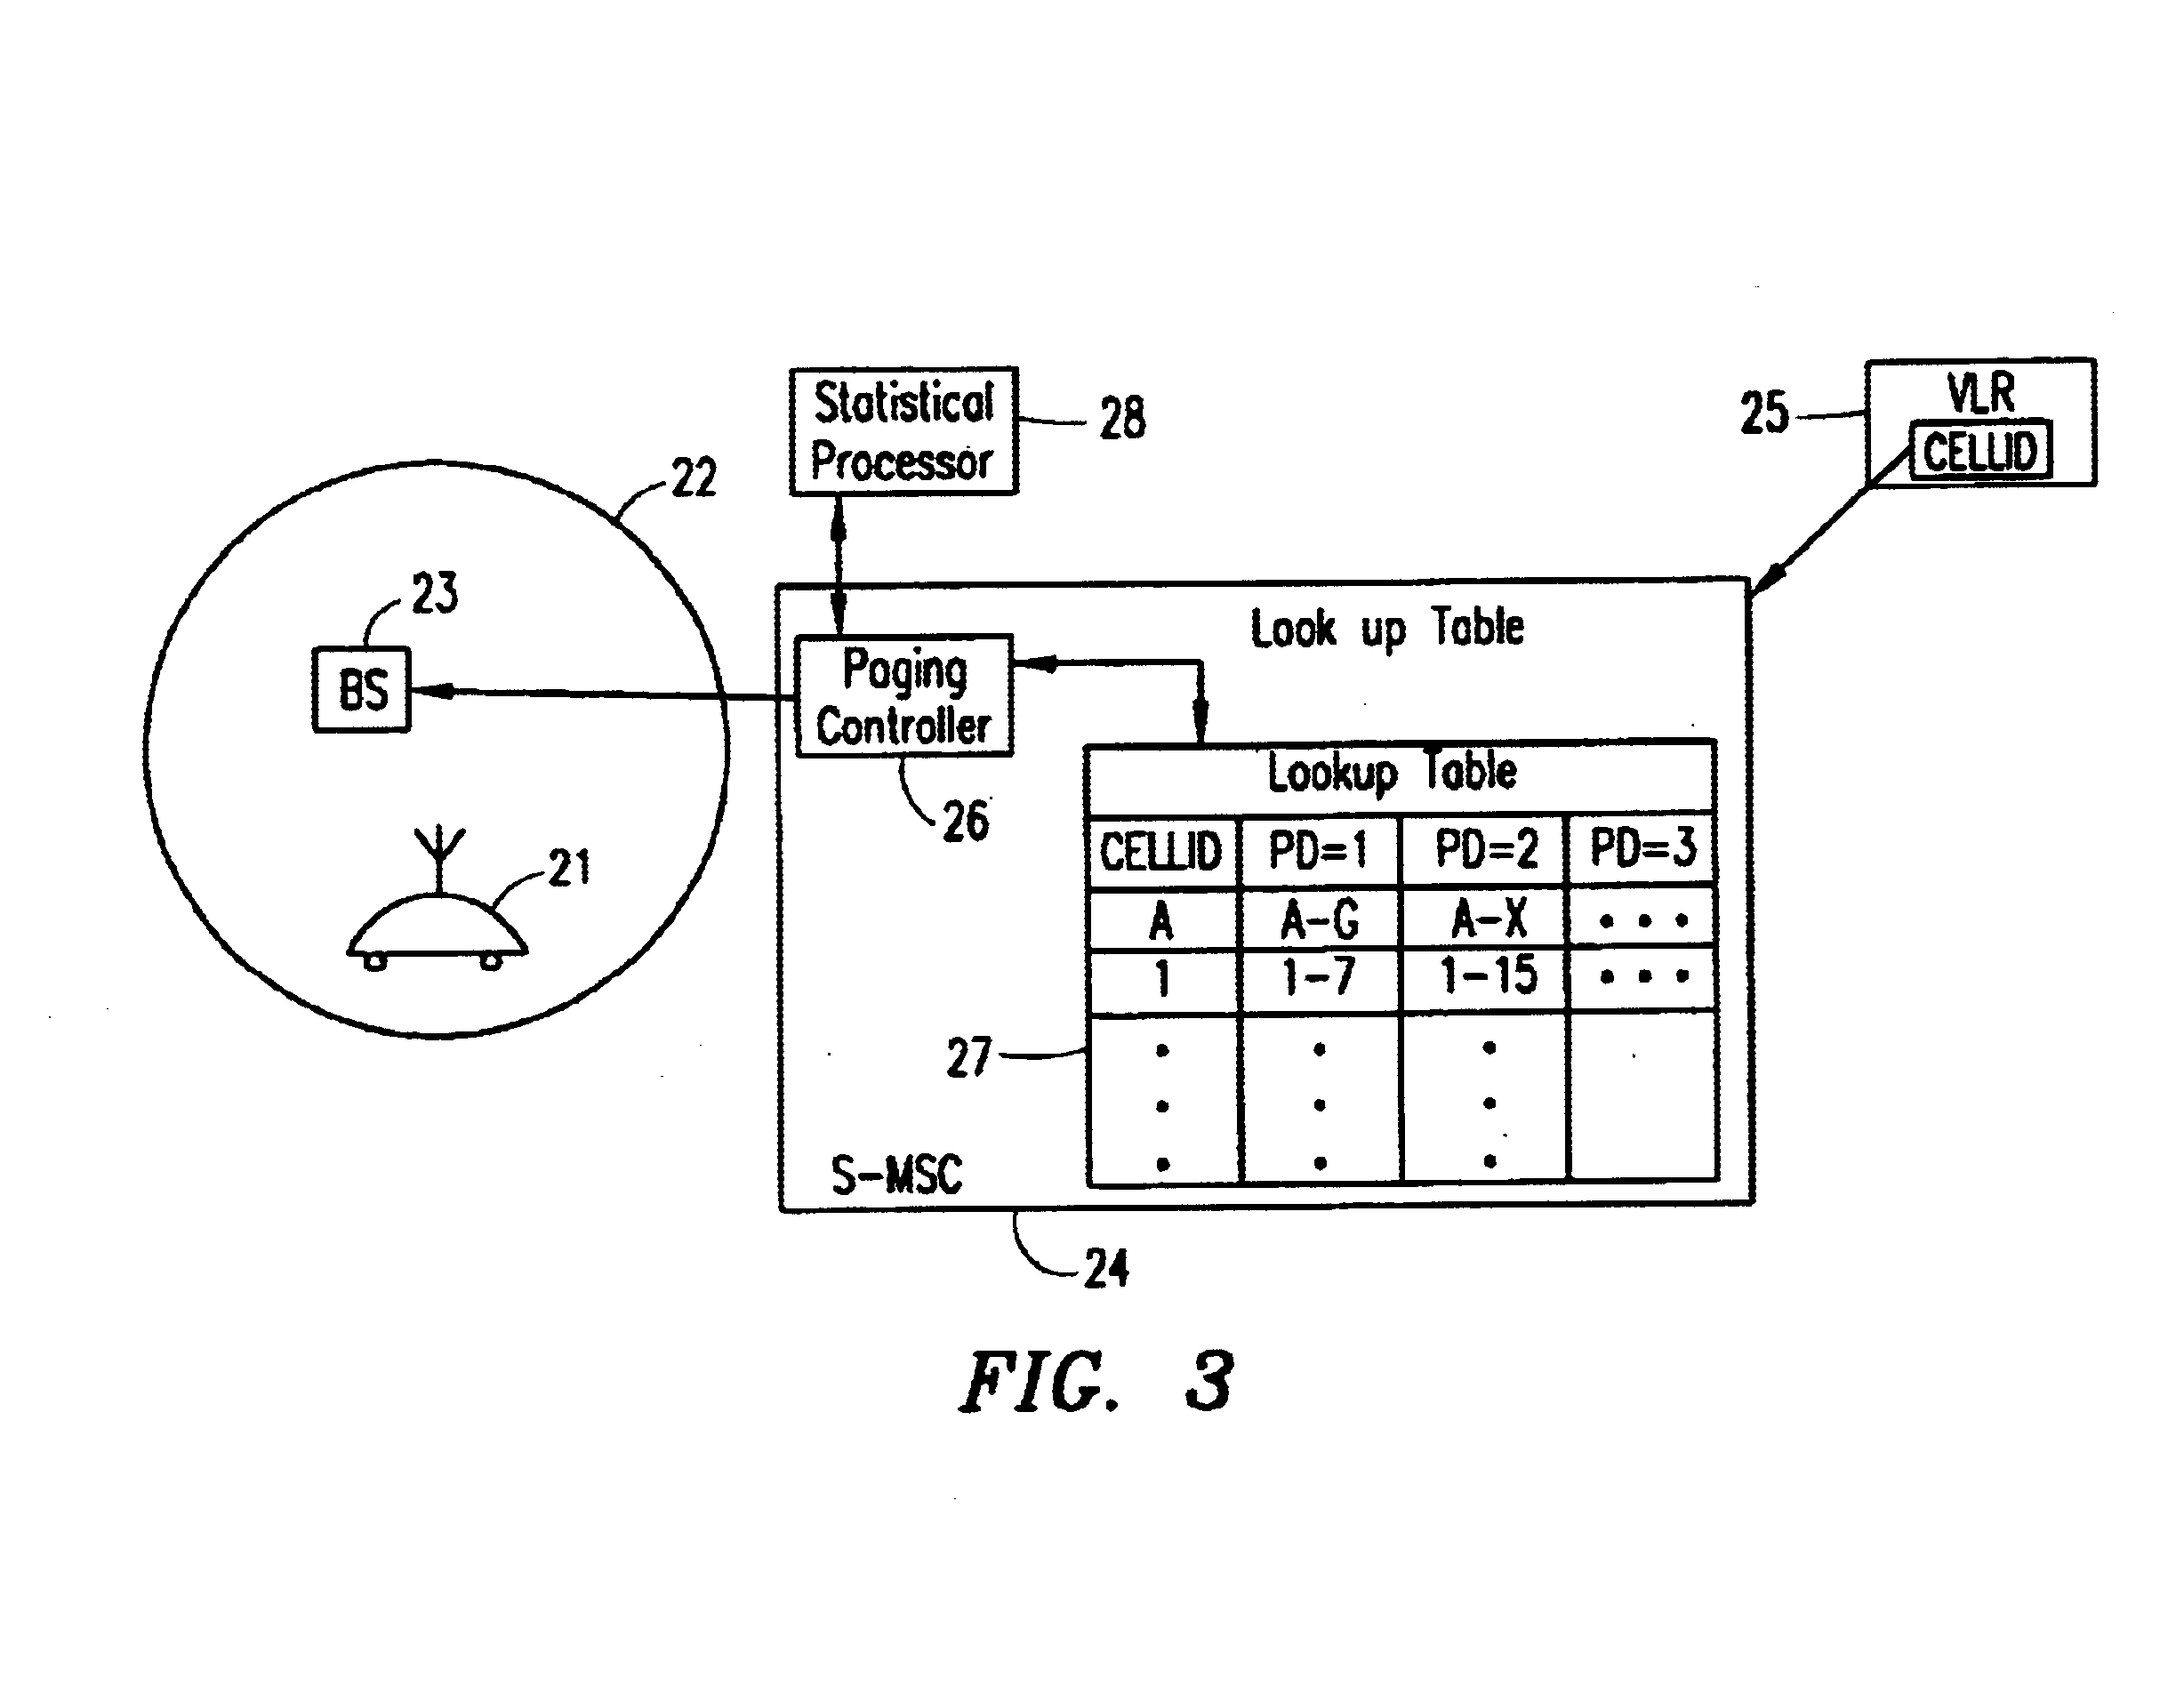 Self-configurable paging system for a cellular telecommunications network